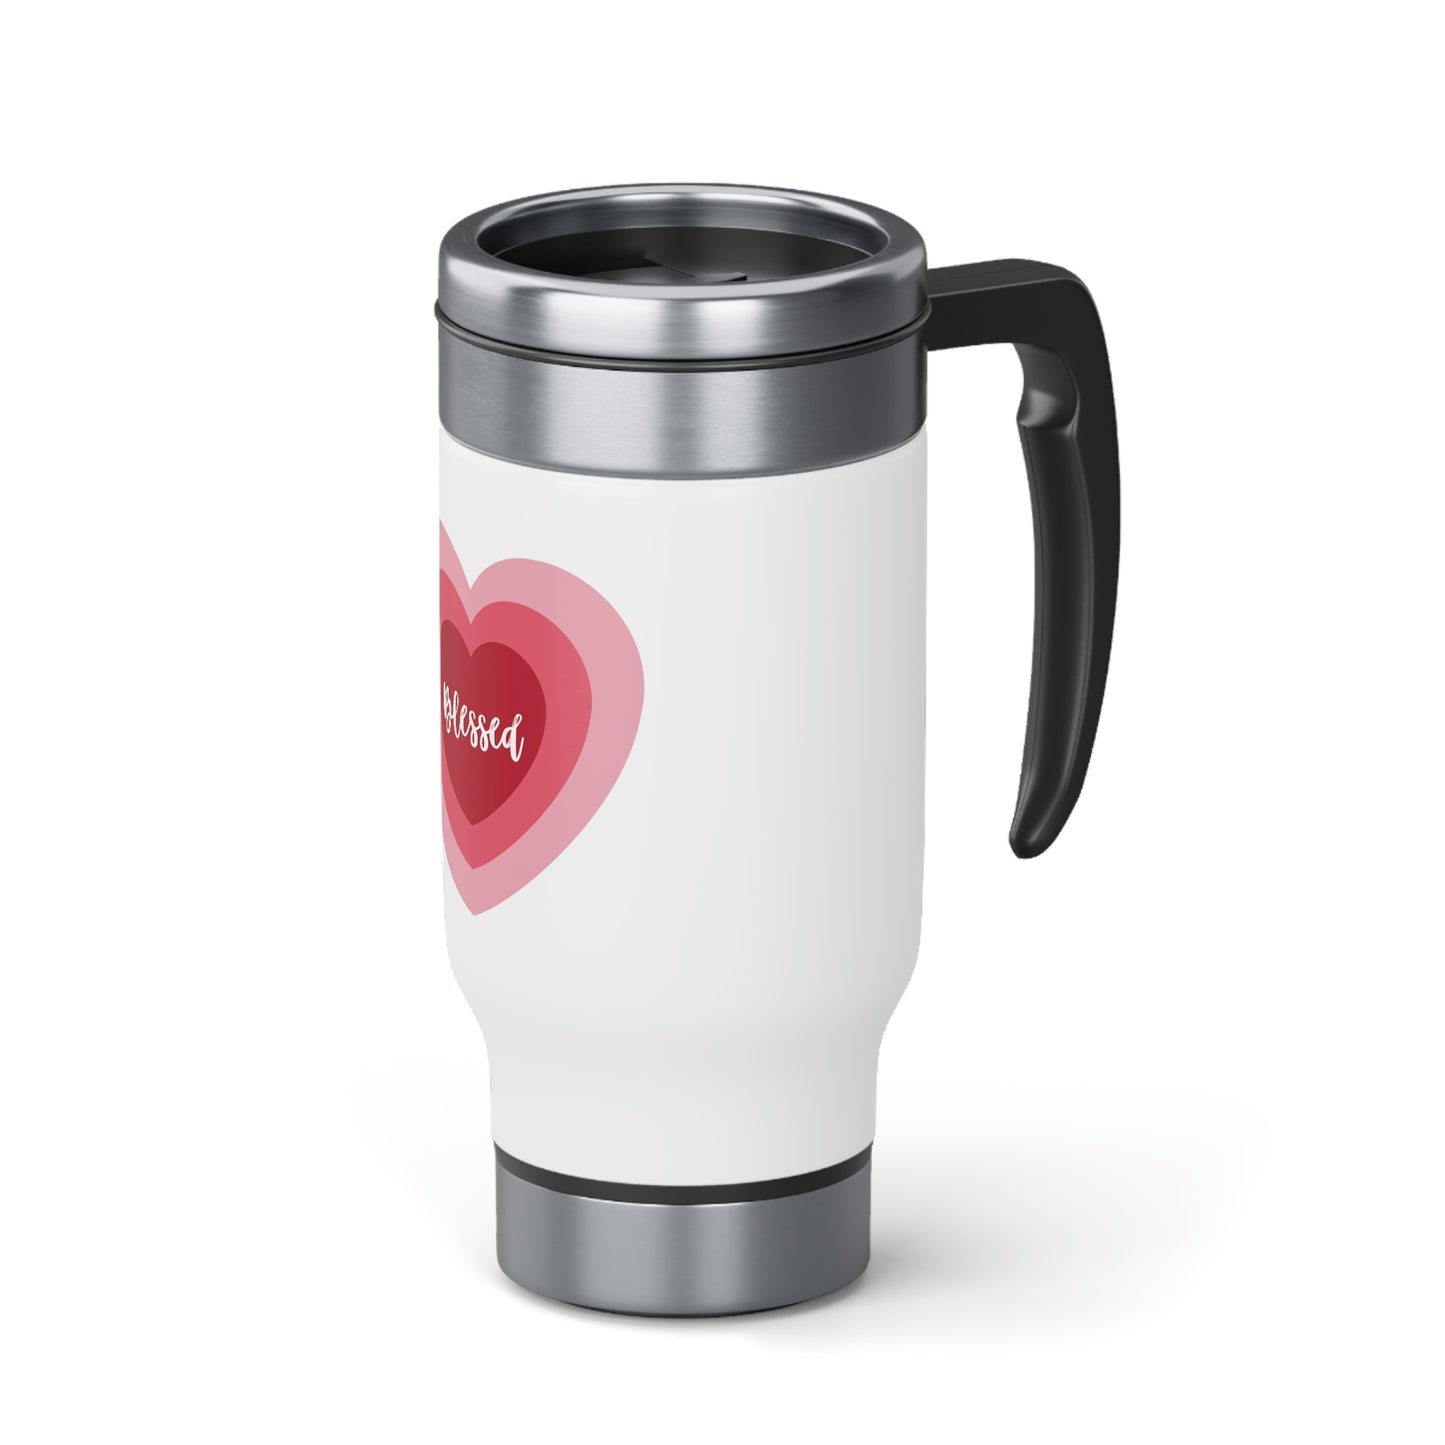 Blessed Heart - Stainless Steel Travel Mug with Handle, 14oz